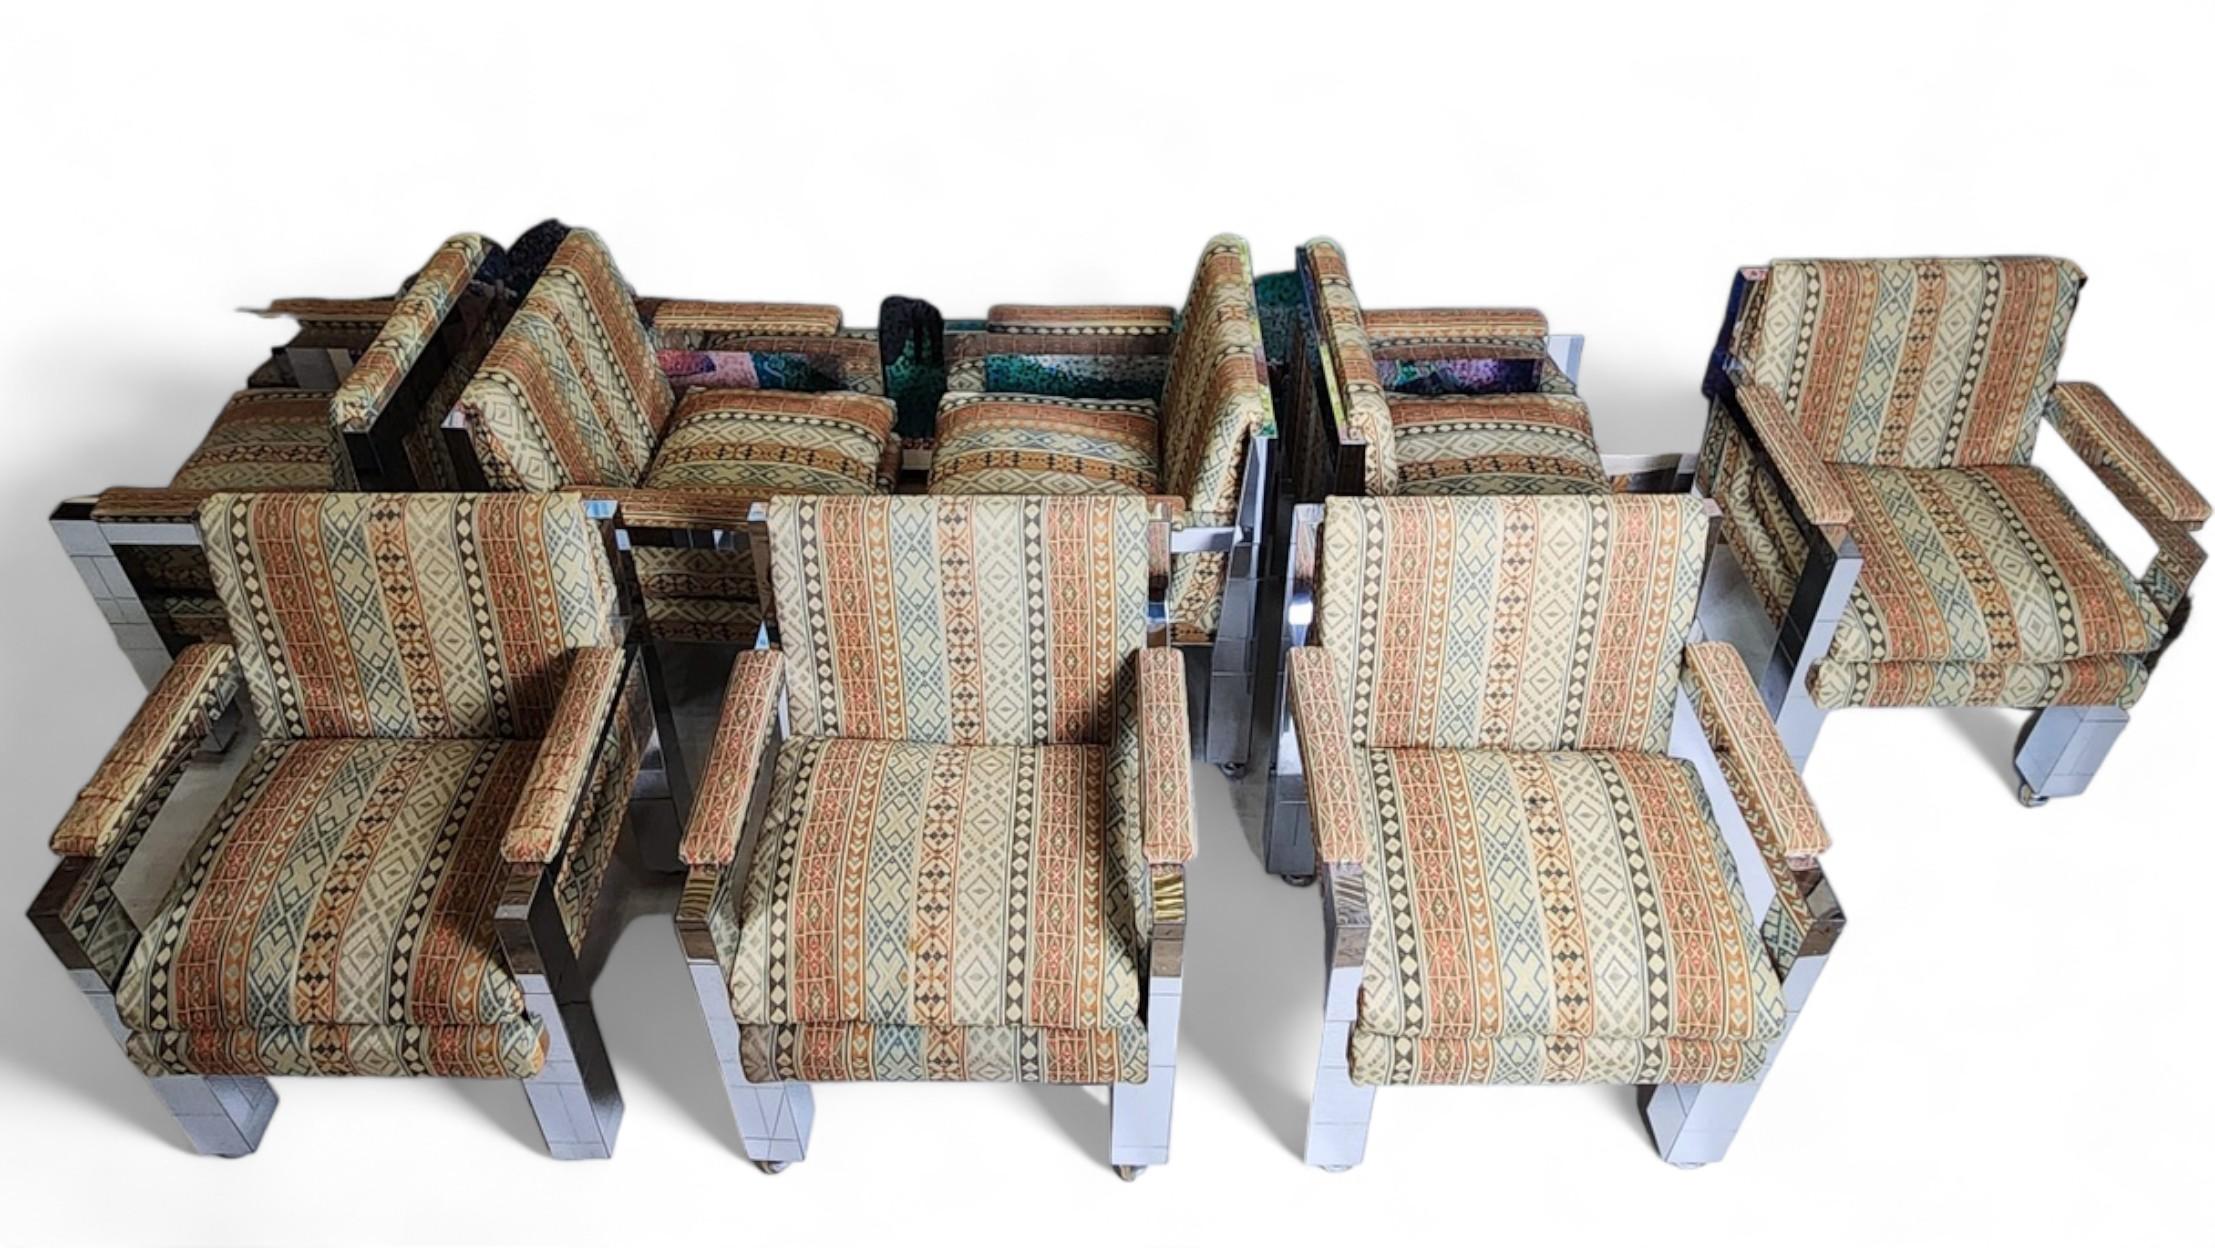 An original 60 year old set of eight unique chrome armchairs on coasters by Paul Evans produced at the Paul Evans Studio designed as part of an extensive commission for the home of personal friends.
The upholstery is original as pictured in the